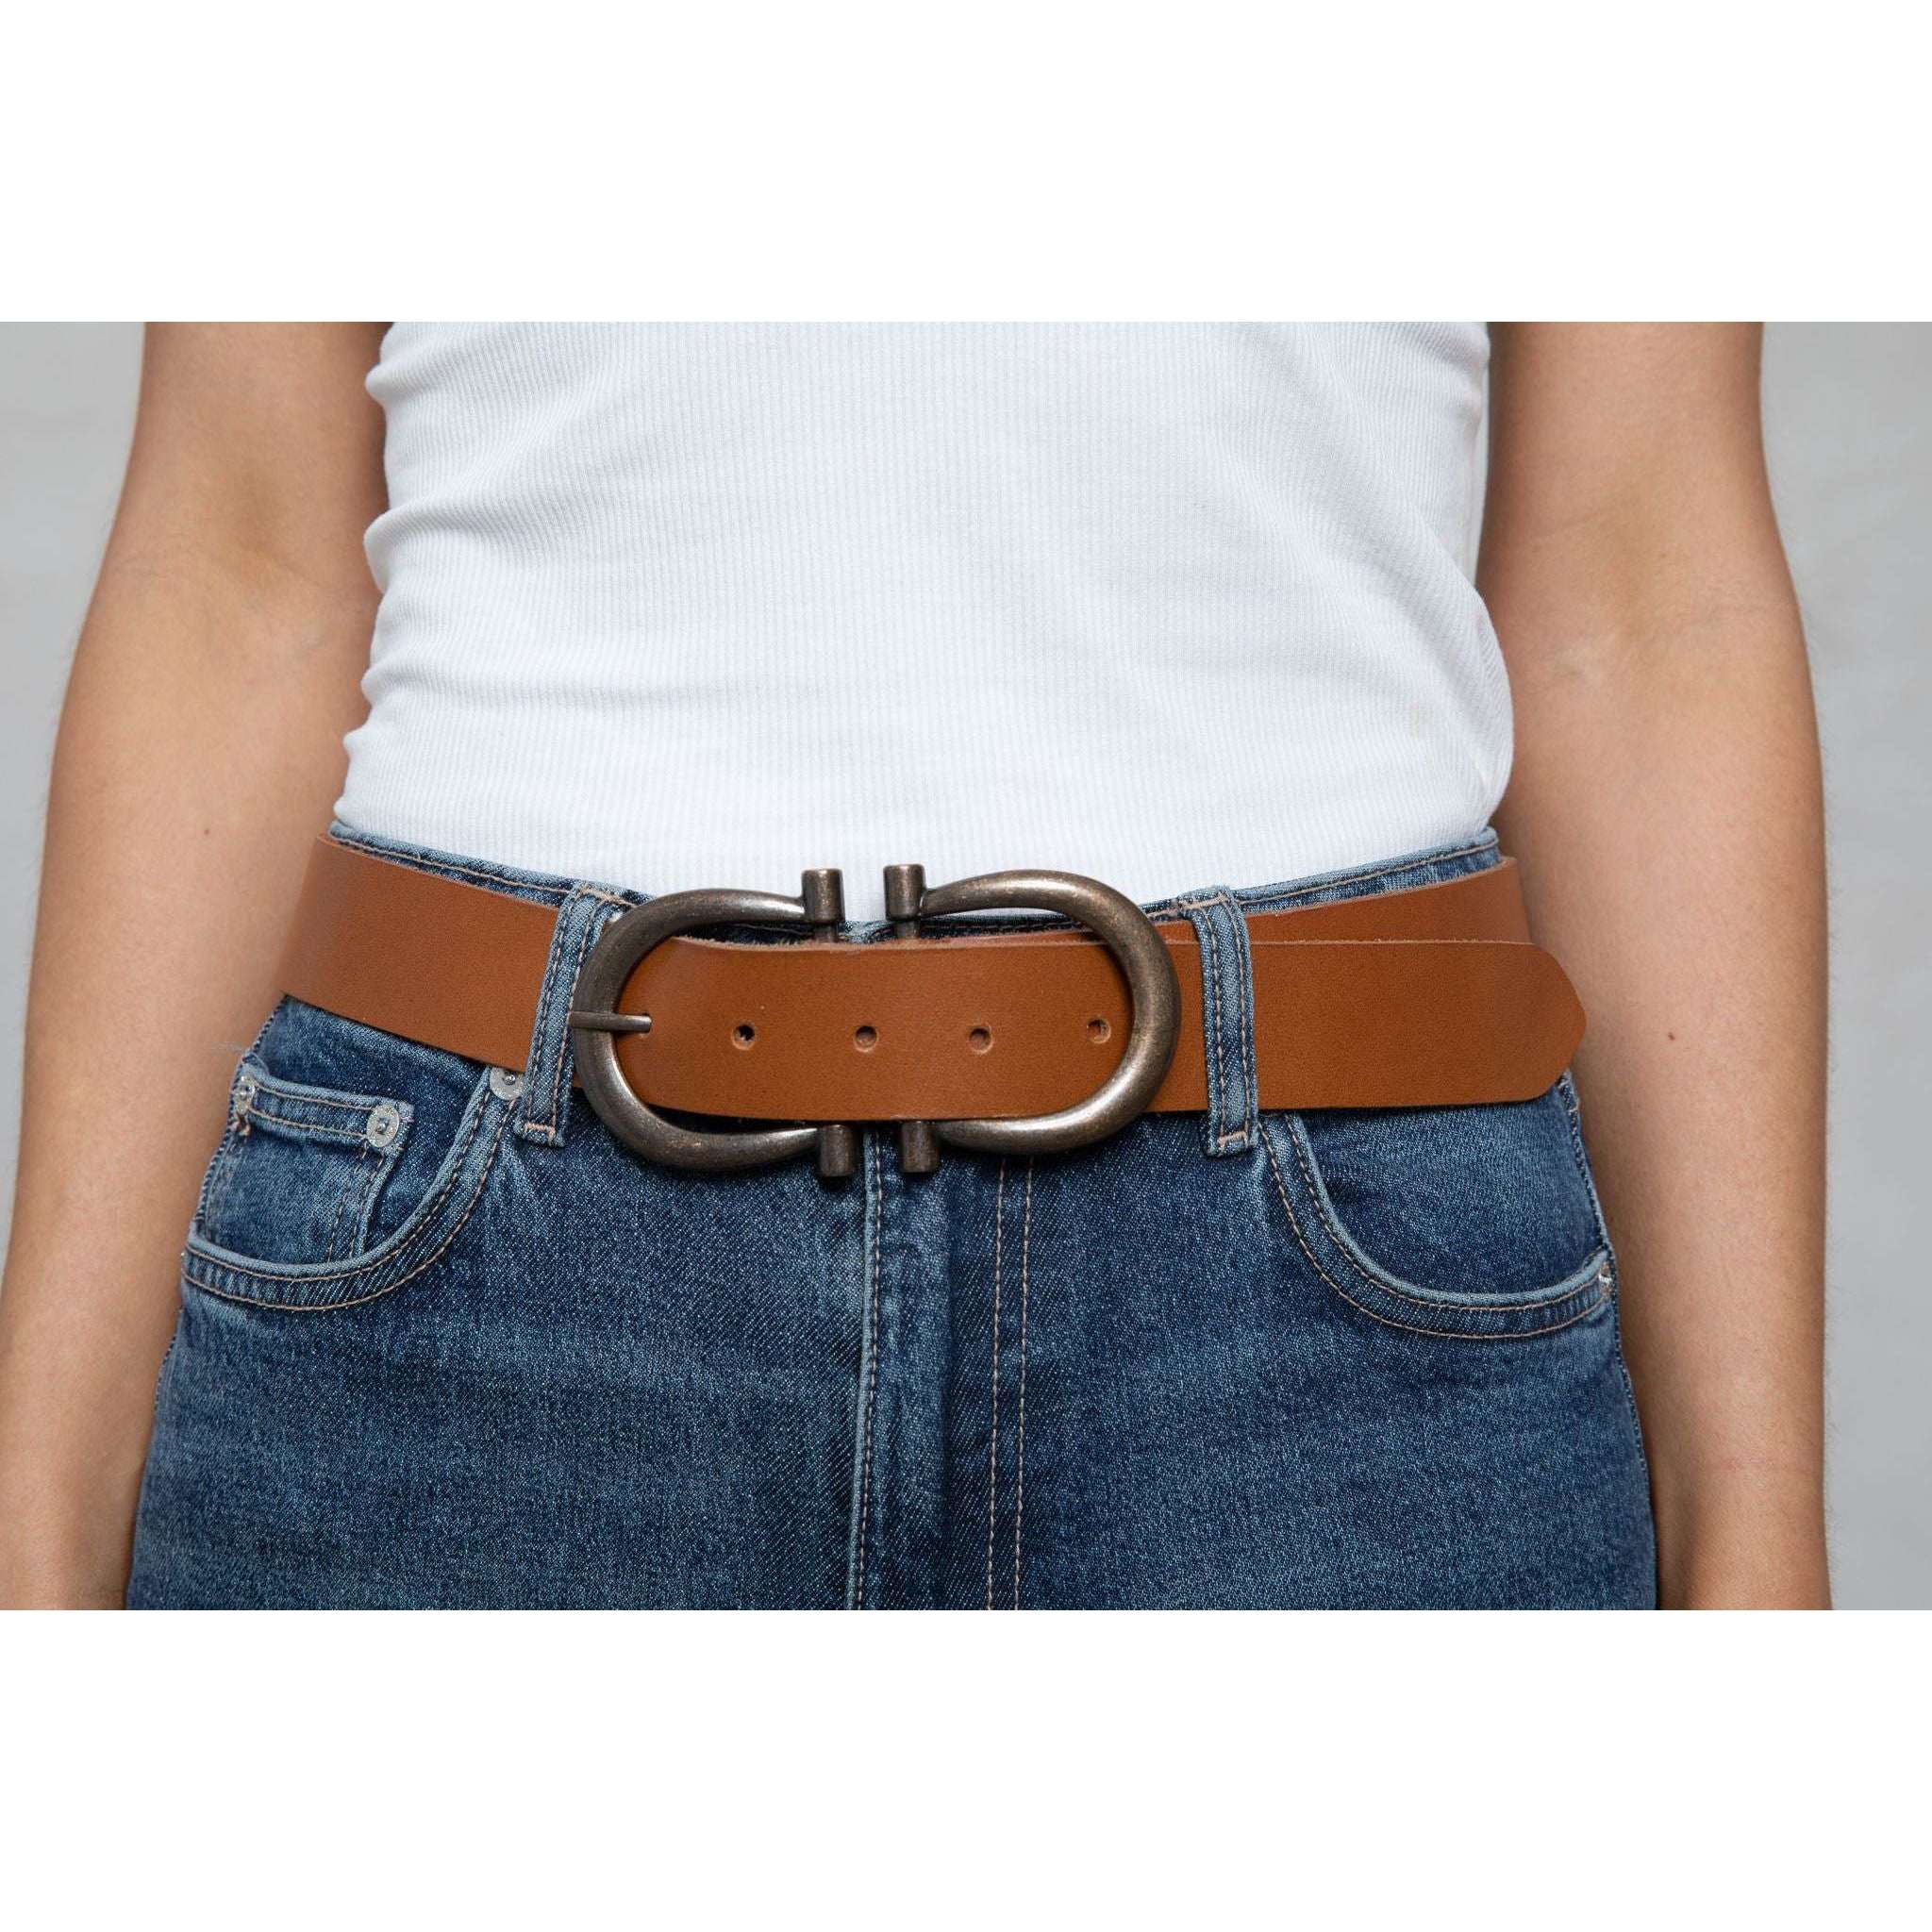 Impodimo Living & Giving:Hidden Valley Belt - Tan:Holiday Trading & Co